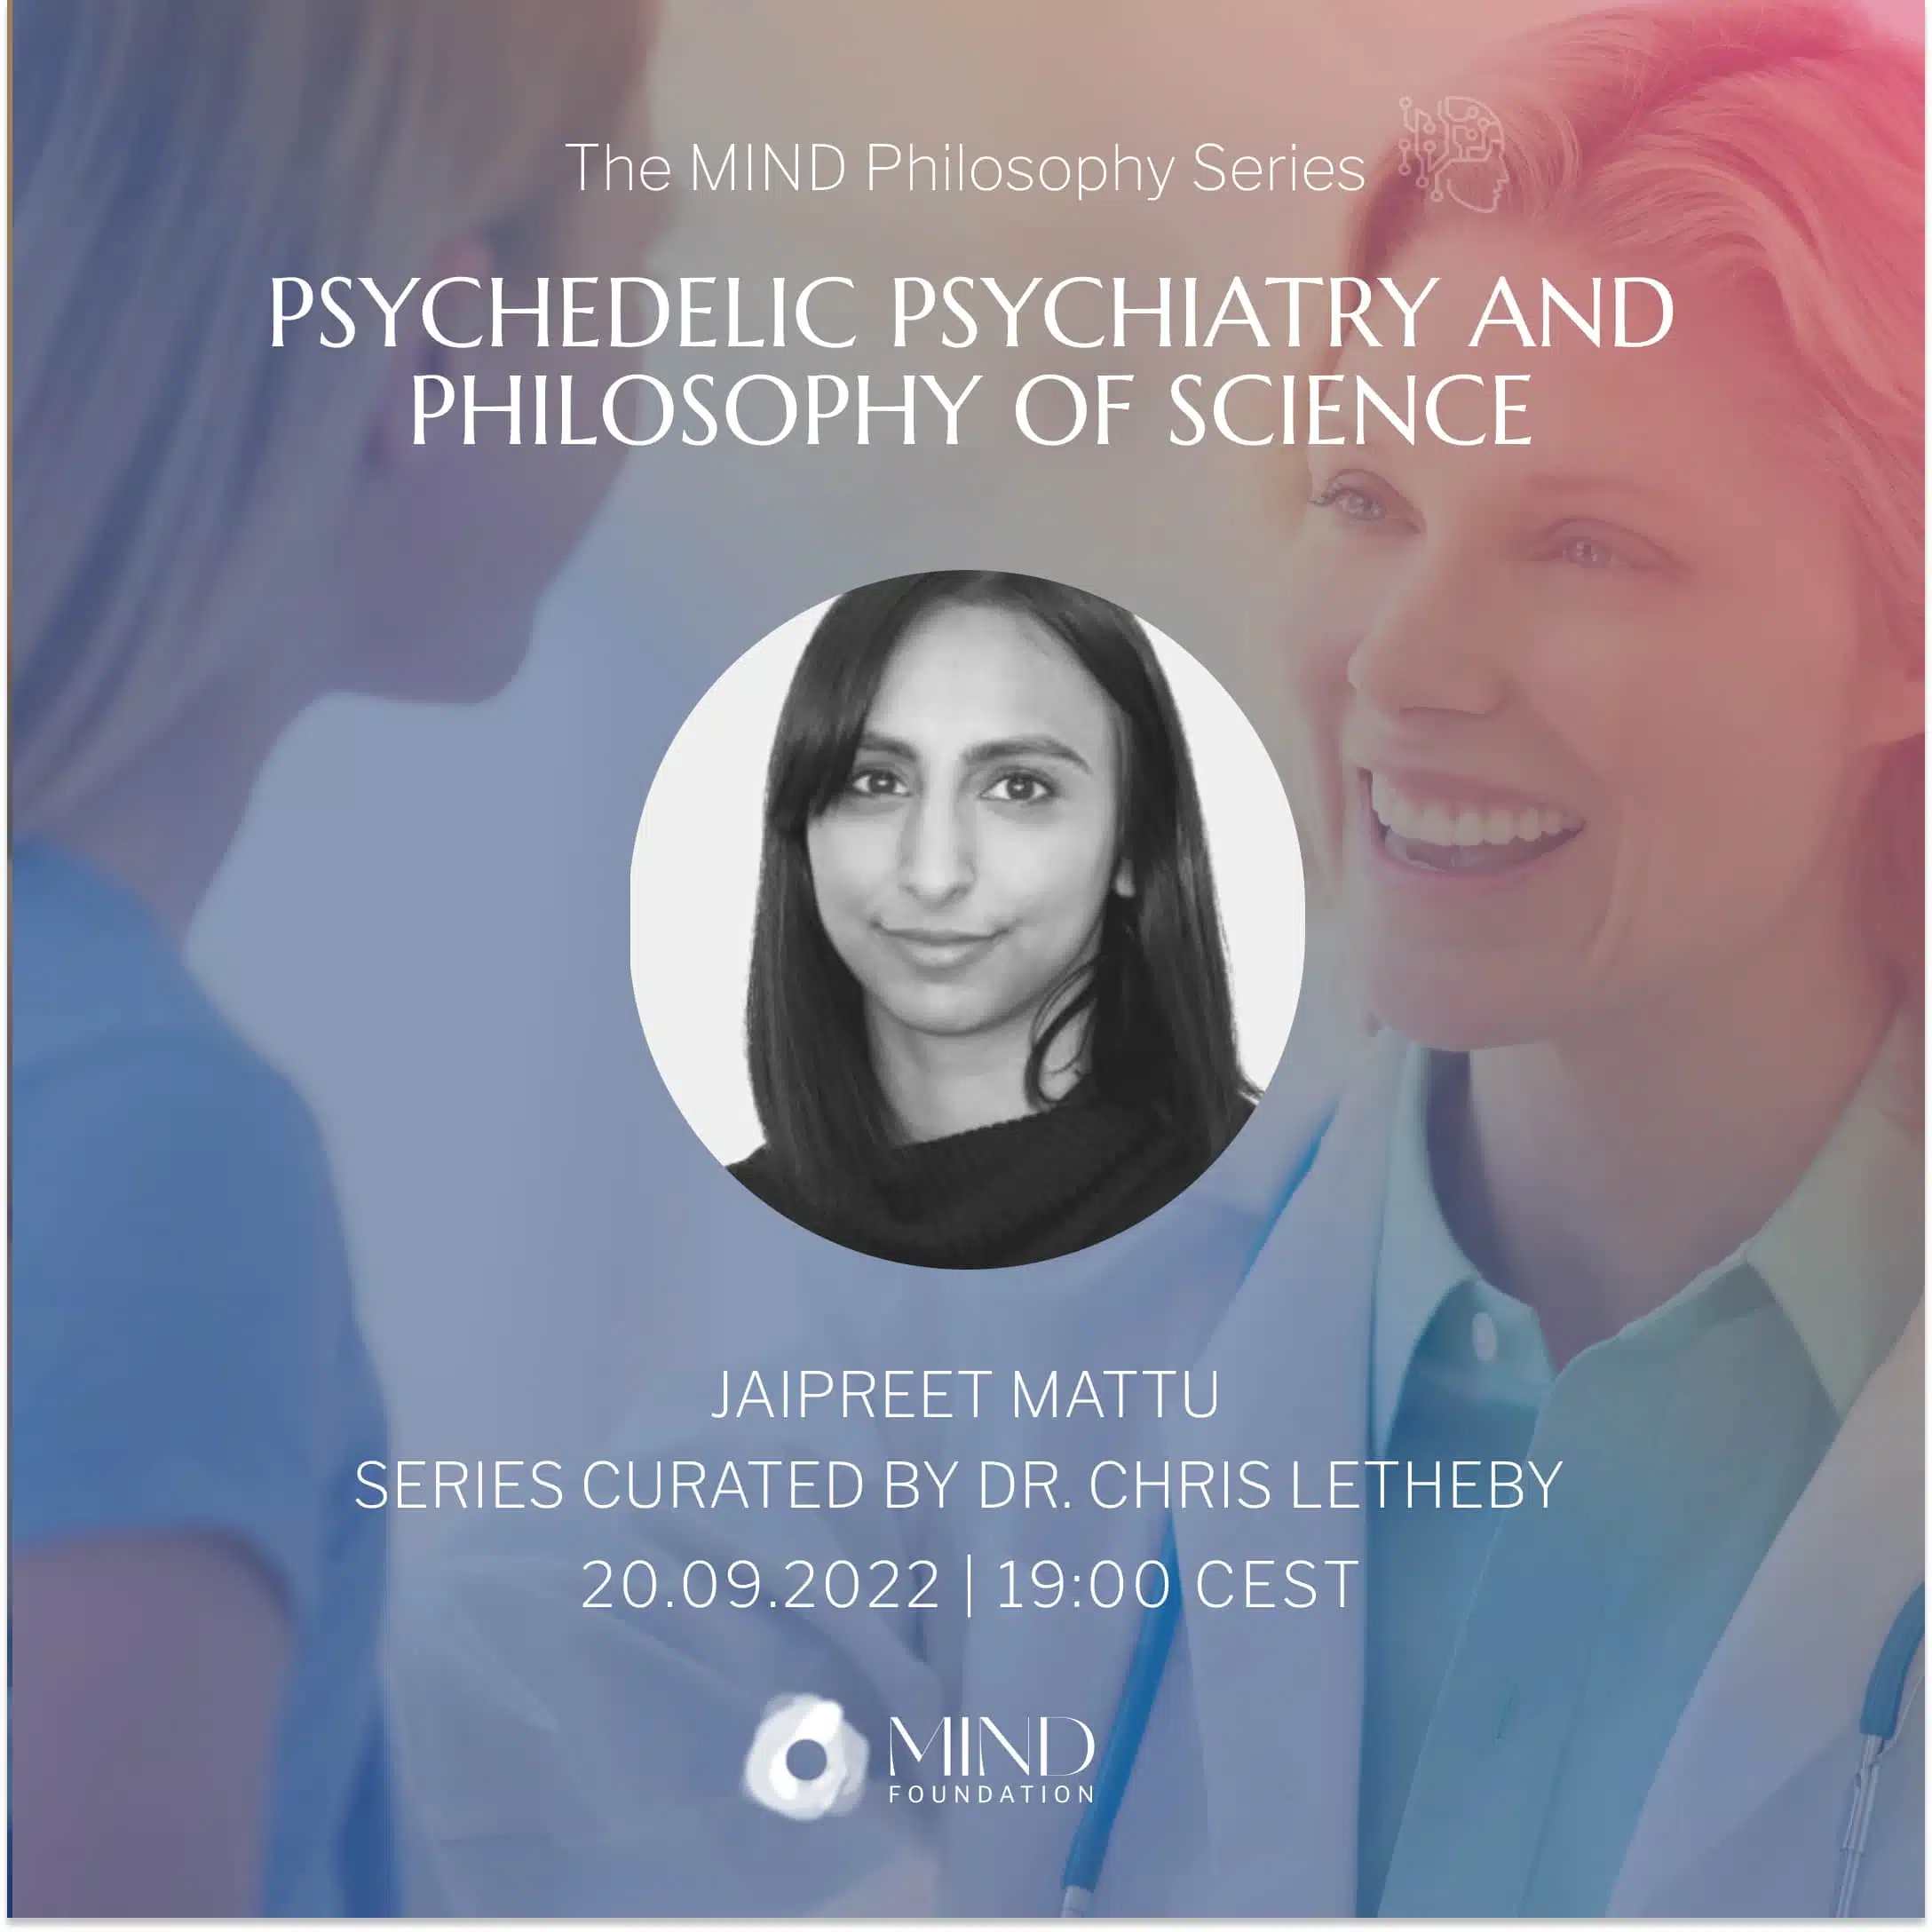  Dr. Jaipreet Mattu – Psychedelic Psychiatry and Philosophy of Science